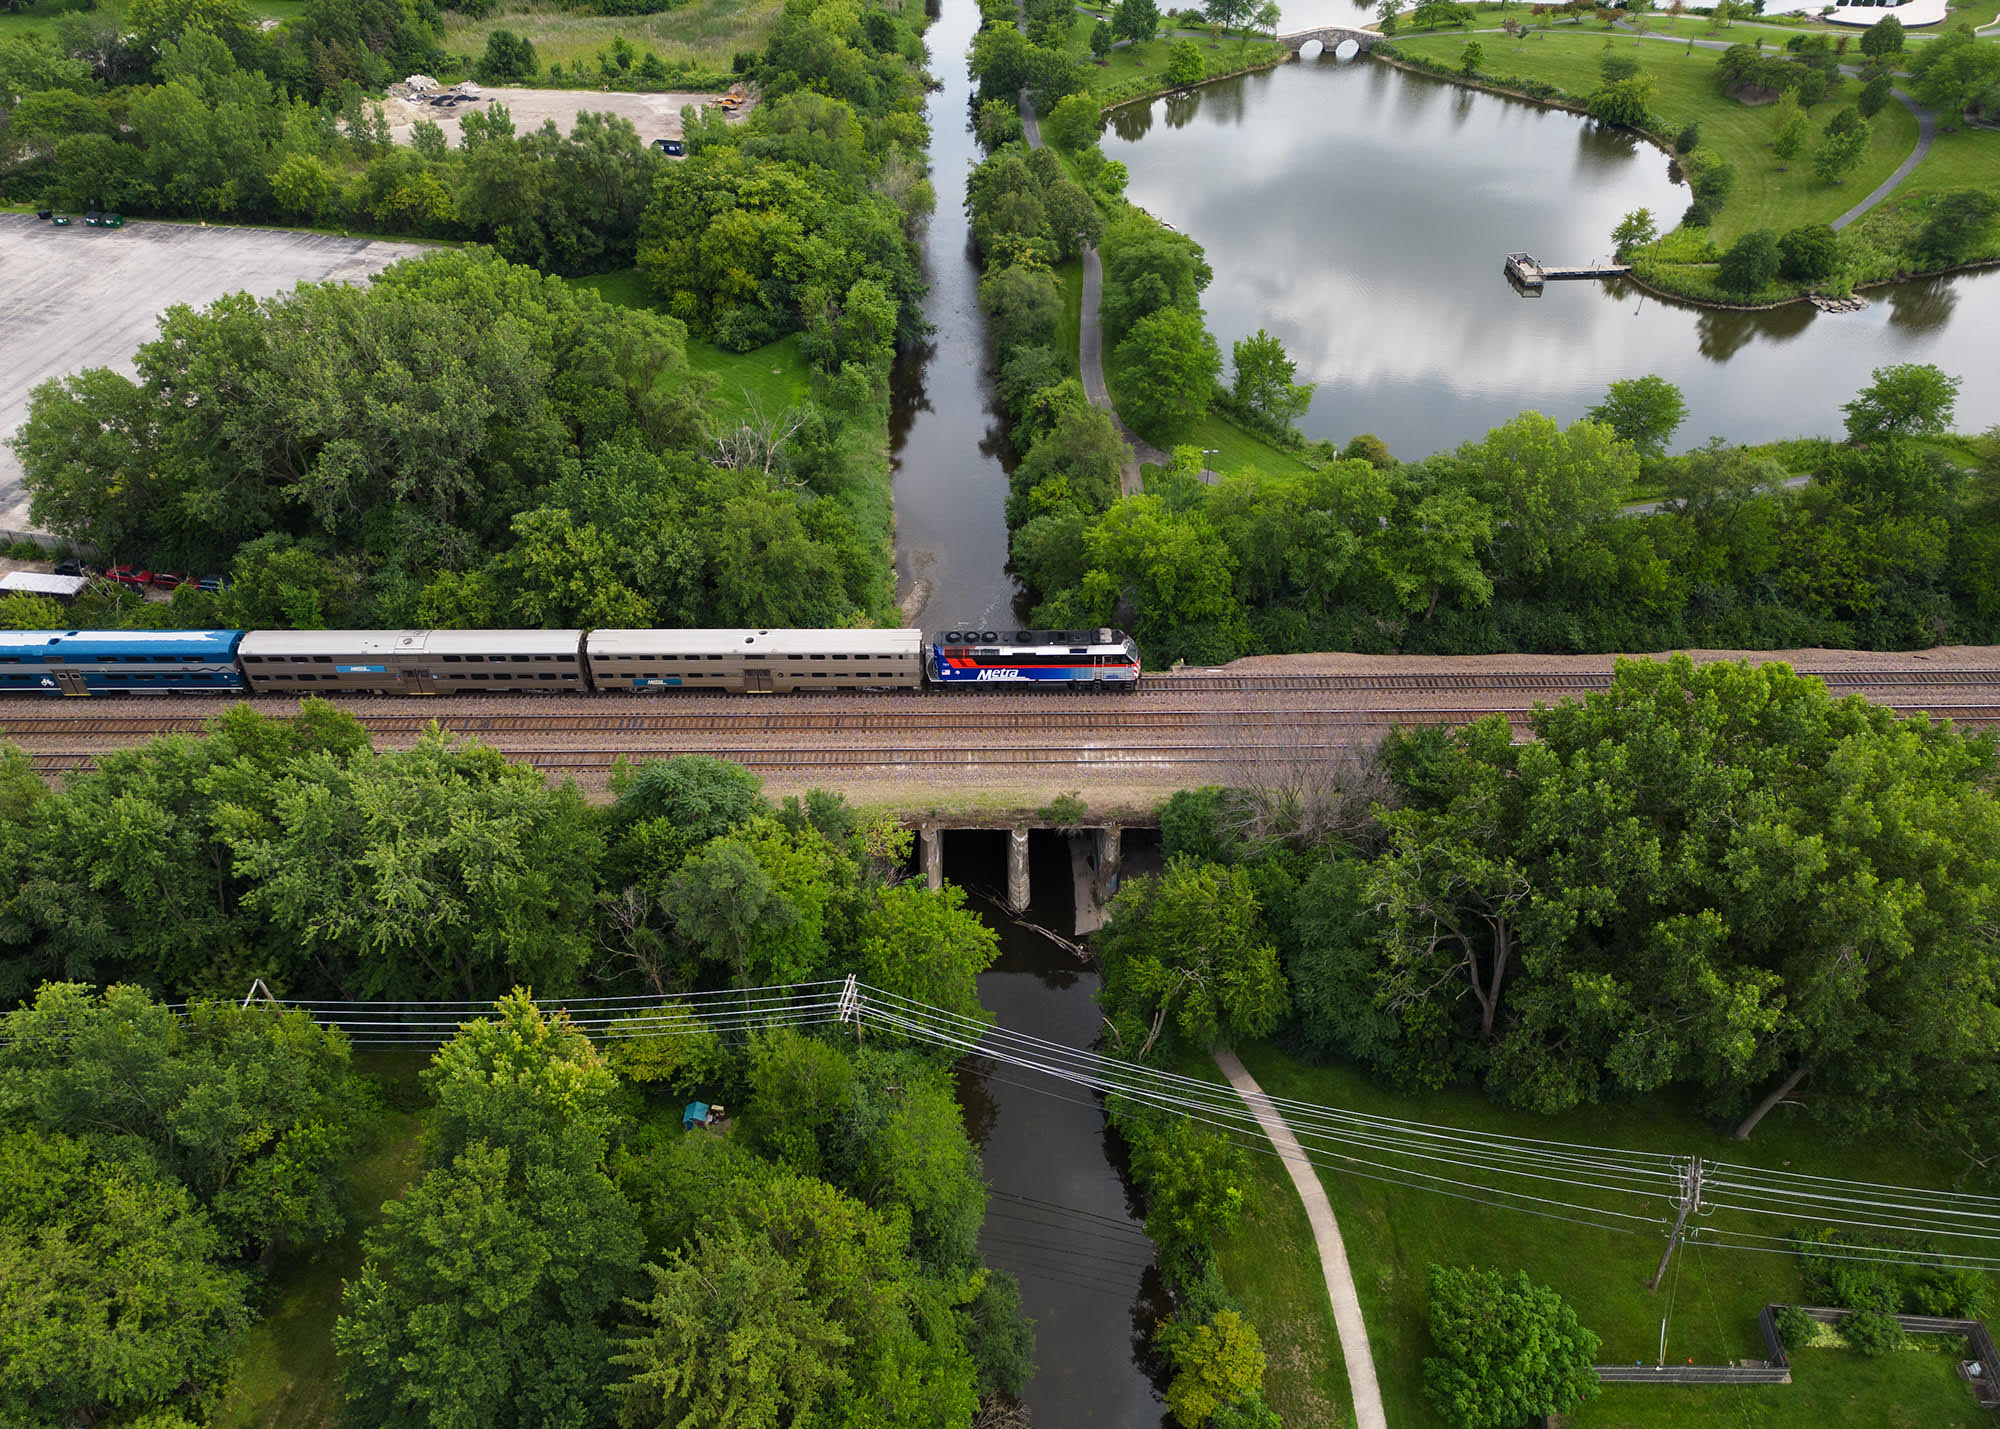 a outbound Metra train crosses over the Fox river in Geneva, IL. as captured from a drone.